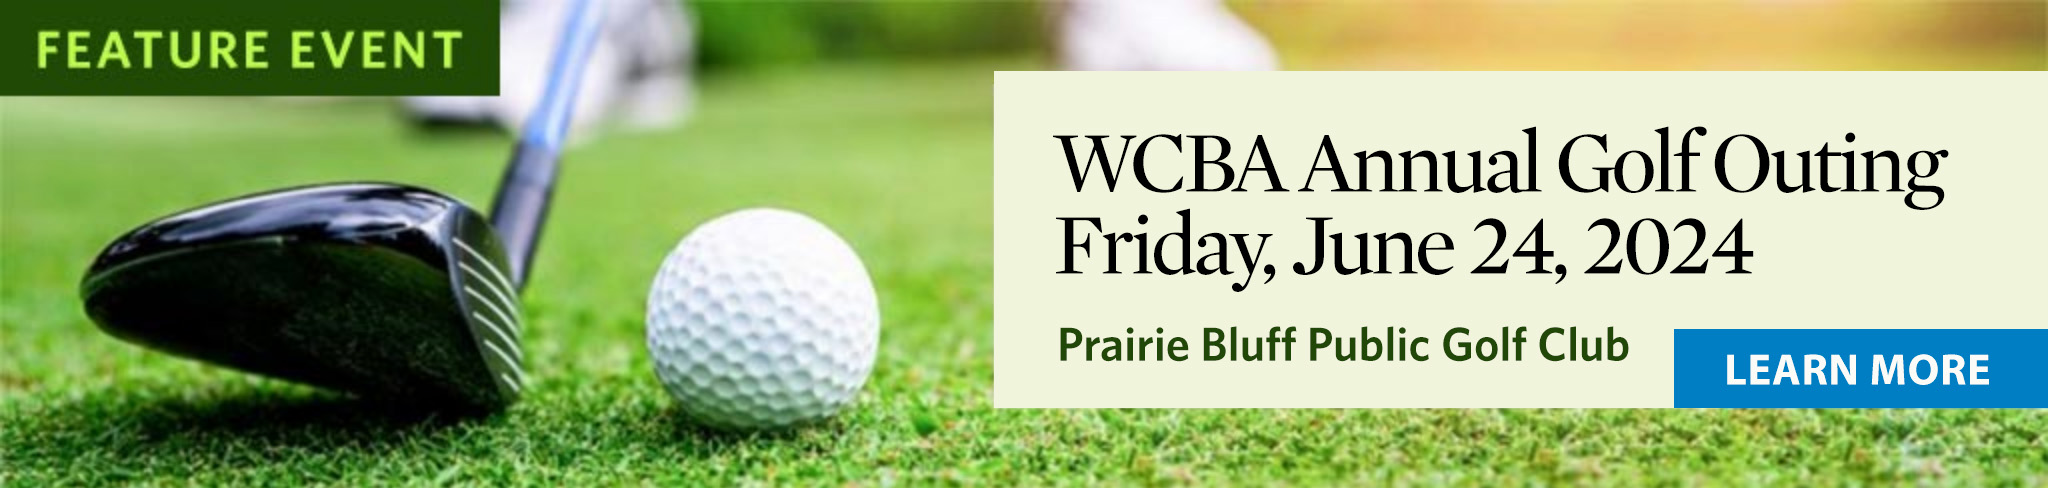 photo of golf putter with text WCBA Annual golf outing 2024 - Learn more